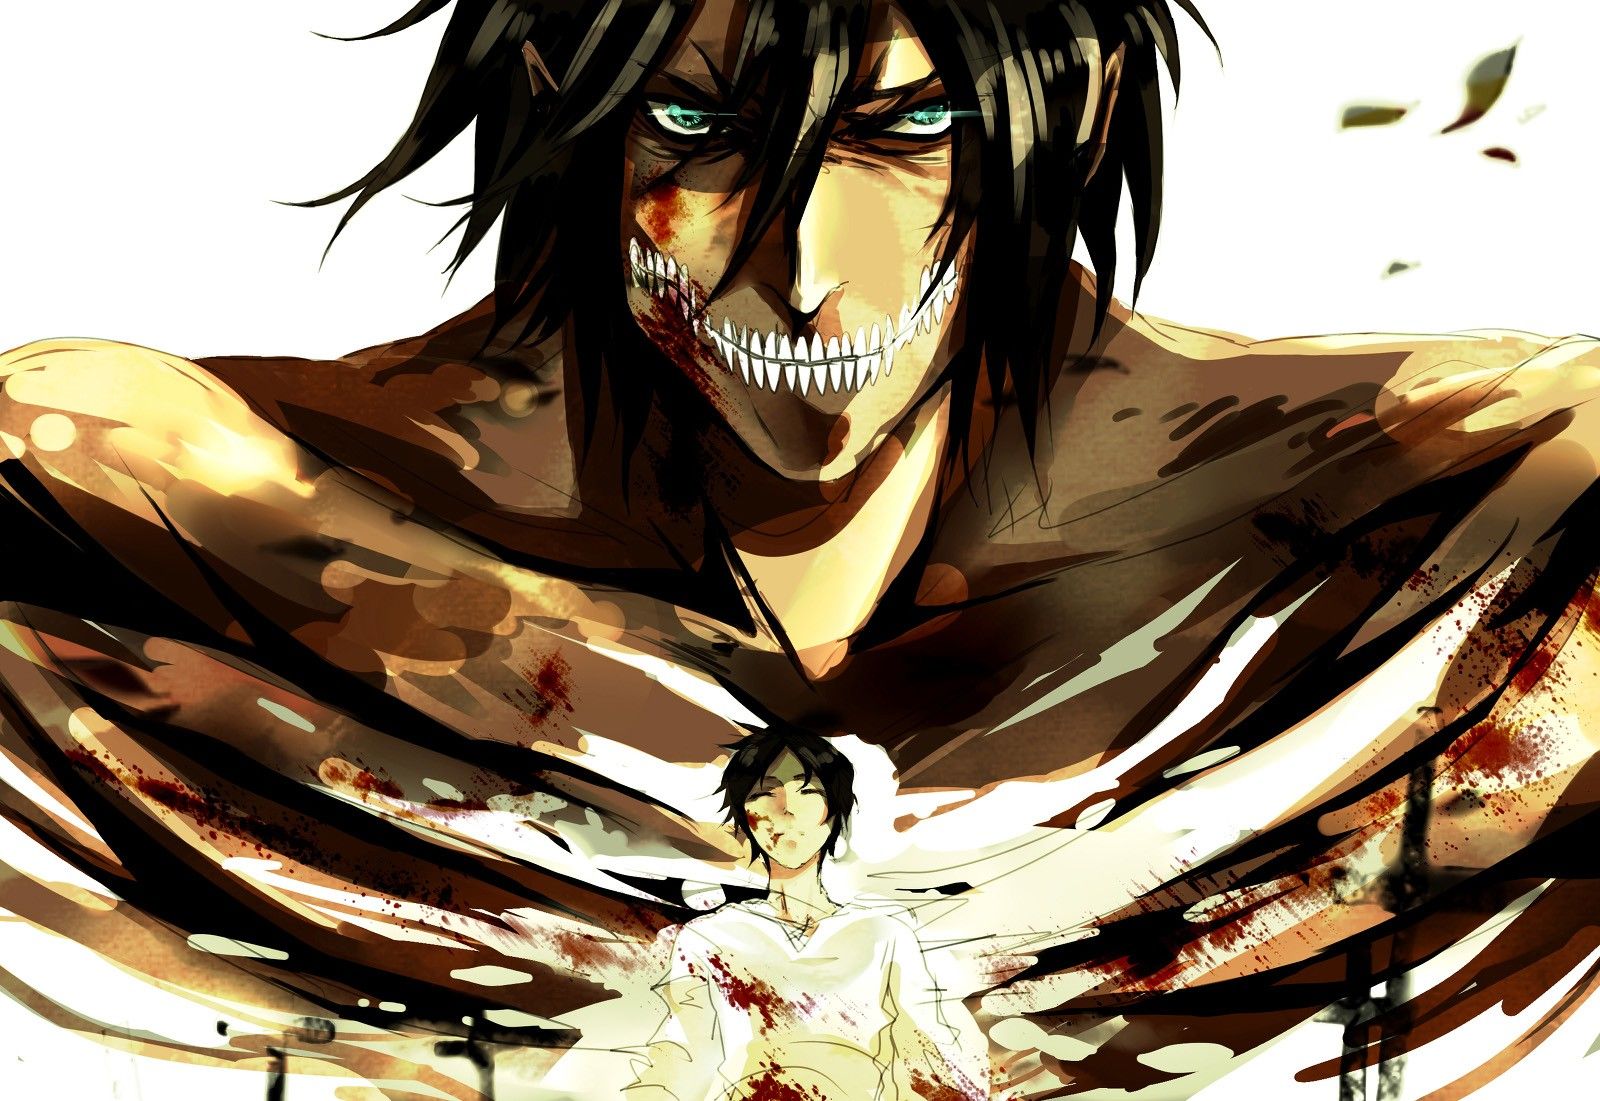 Does anybody have good wallpaper for Attack on Titans for mobile and Desktop?